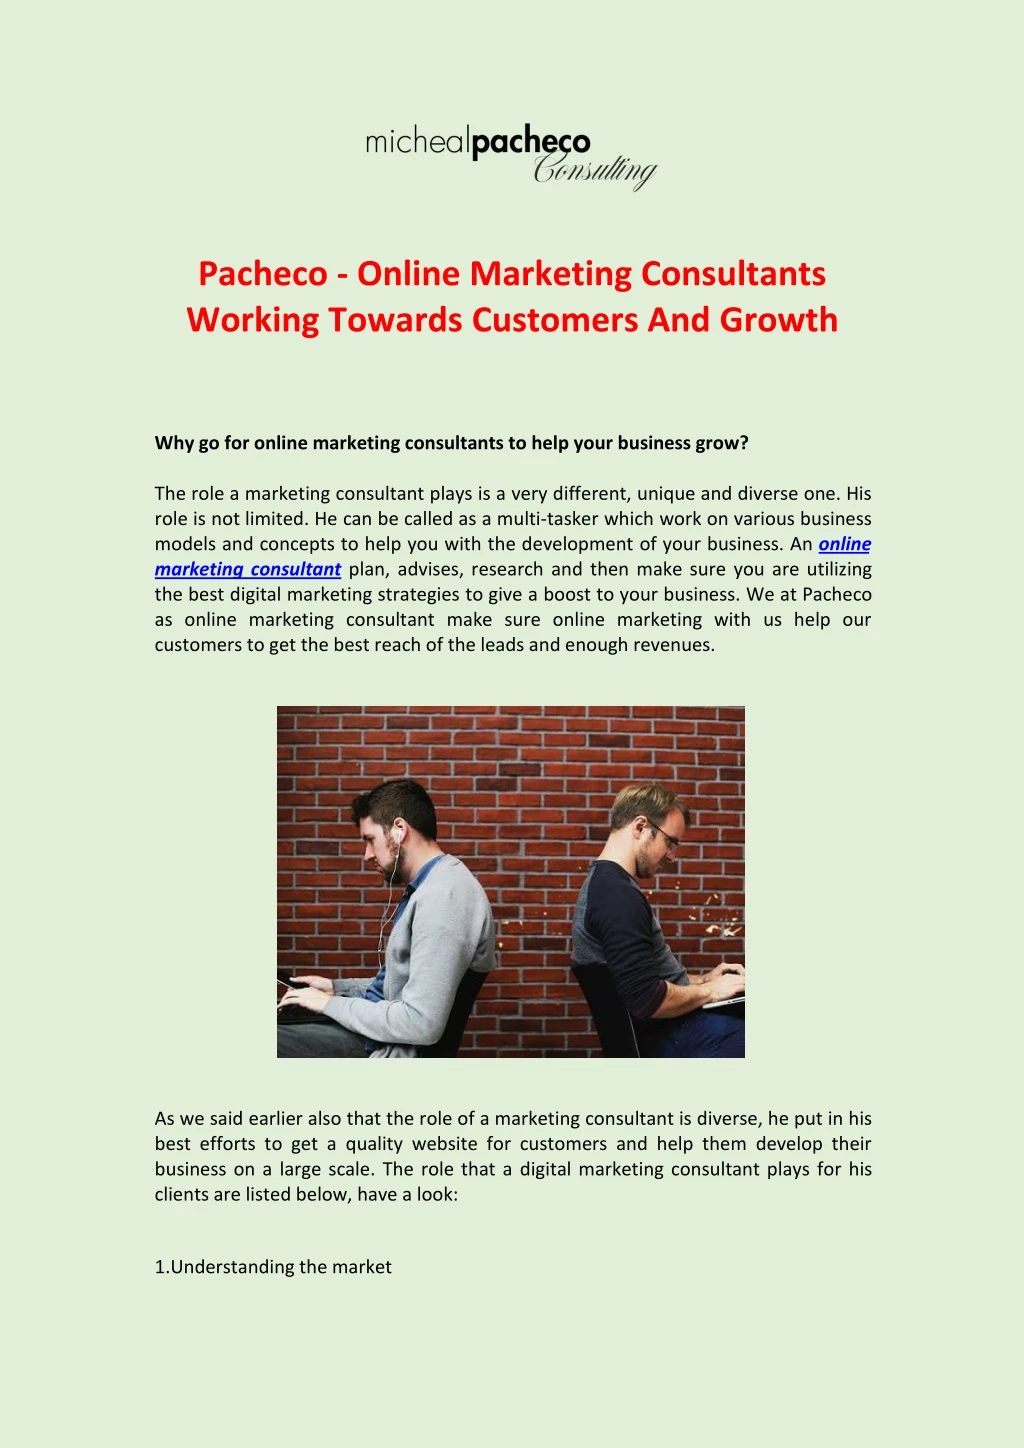 pacheco online marketing consultants working